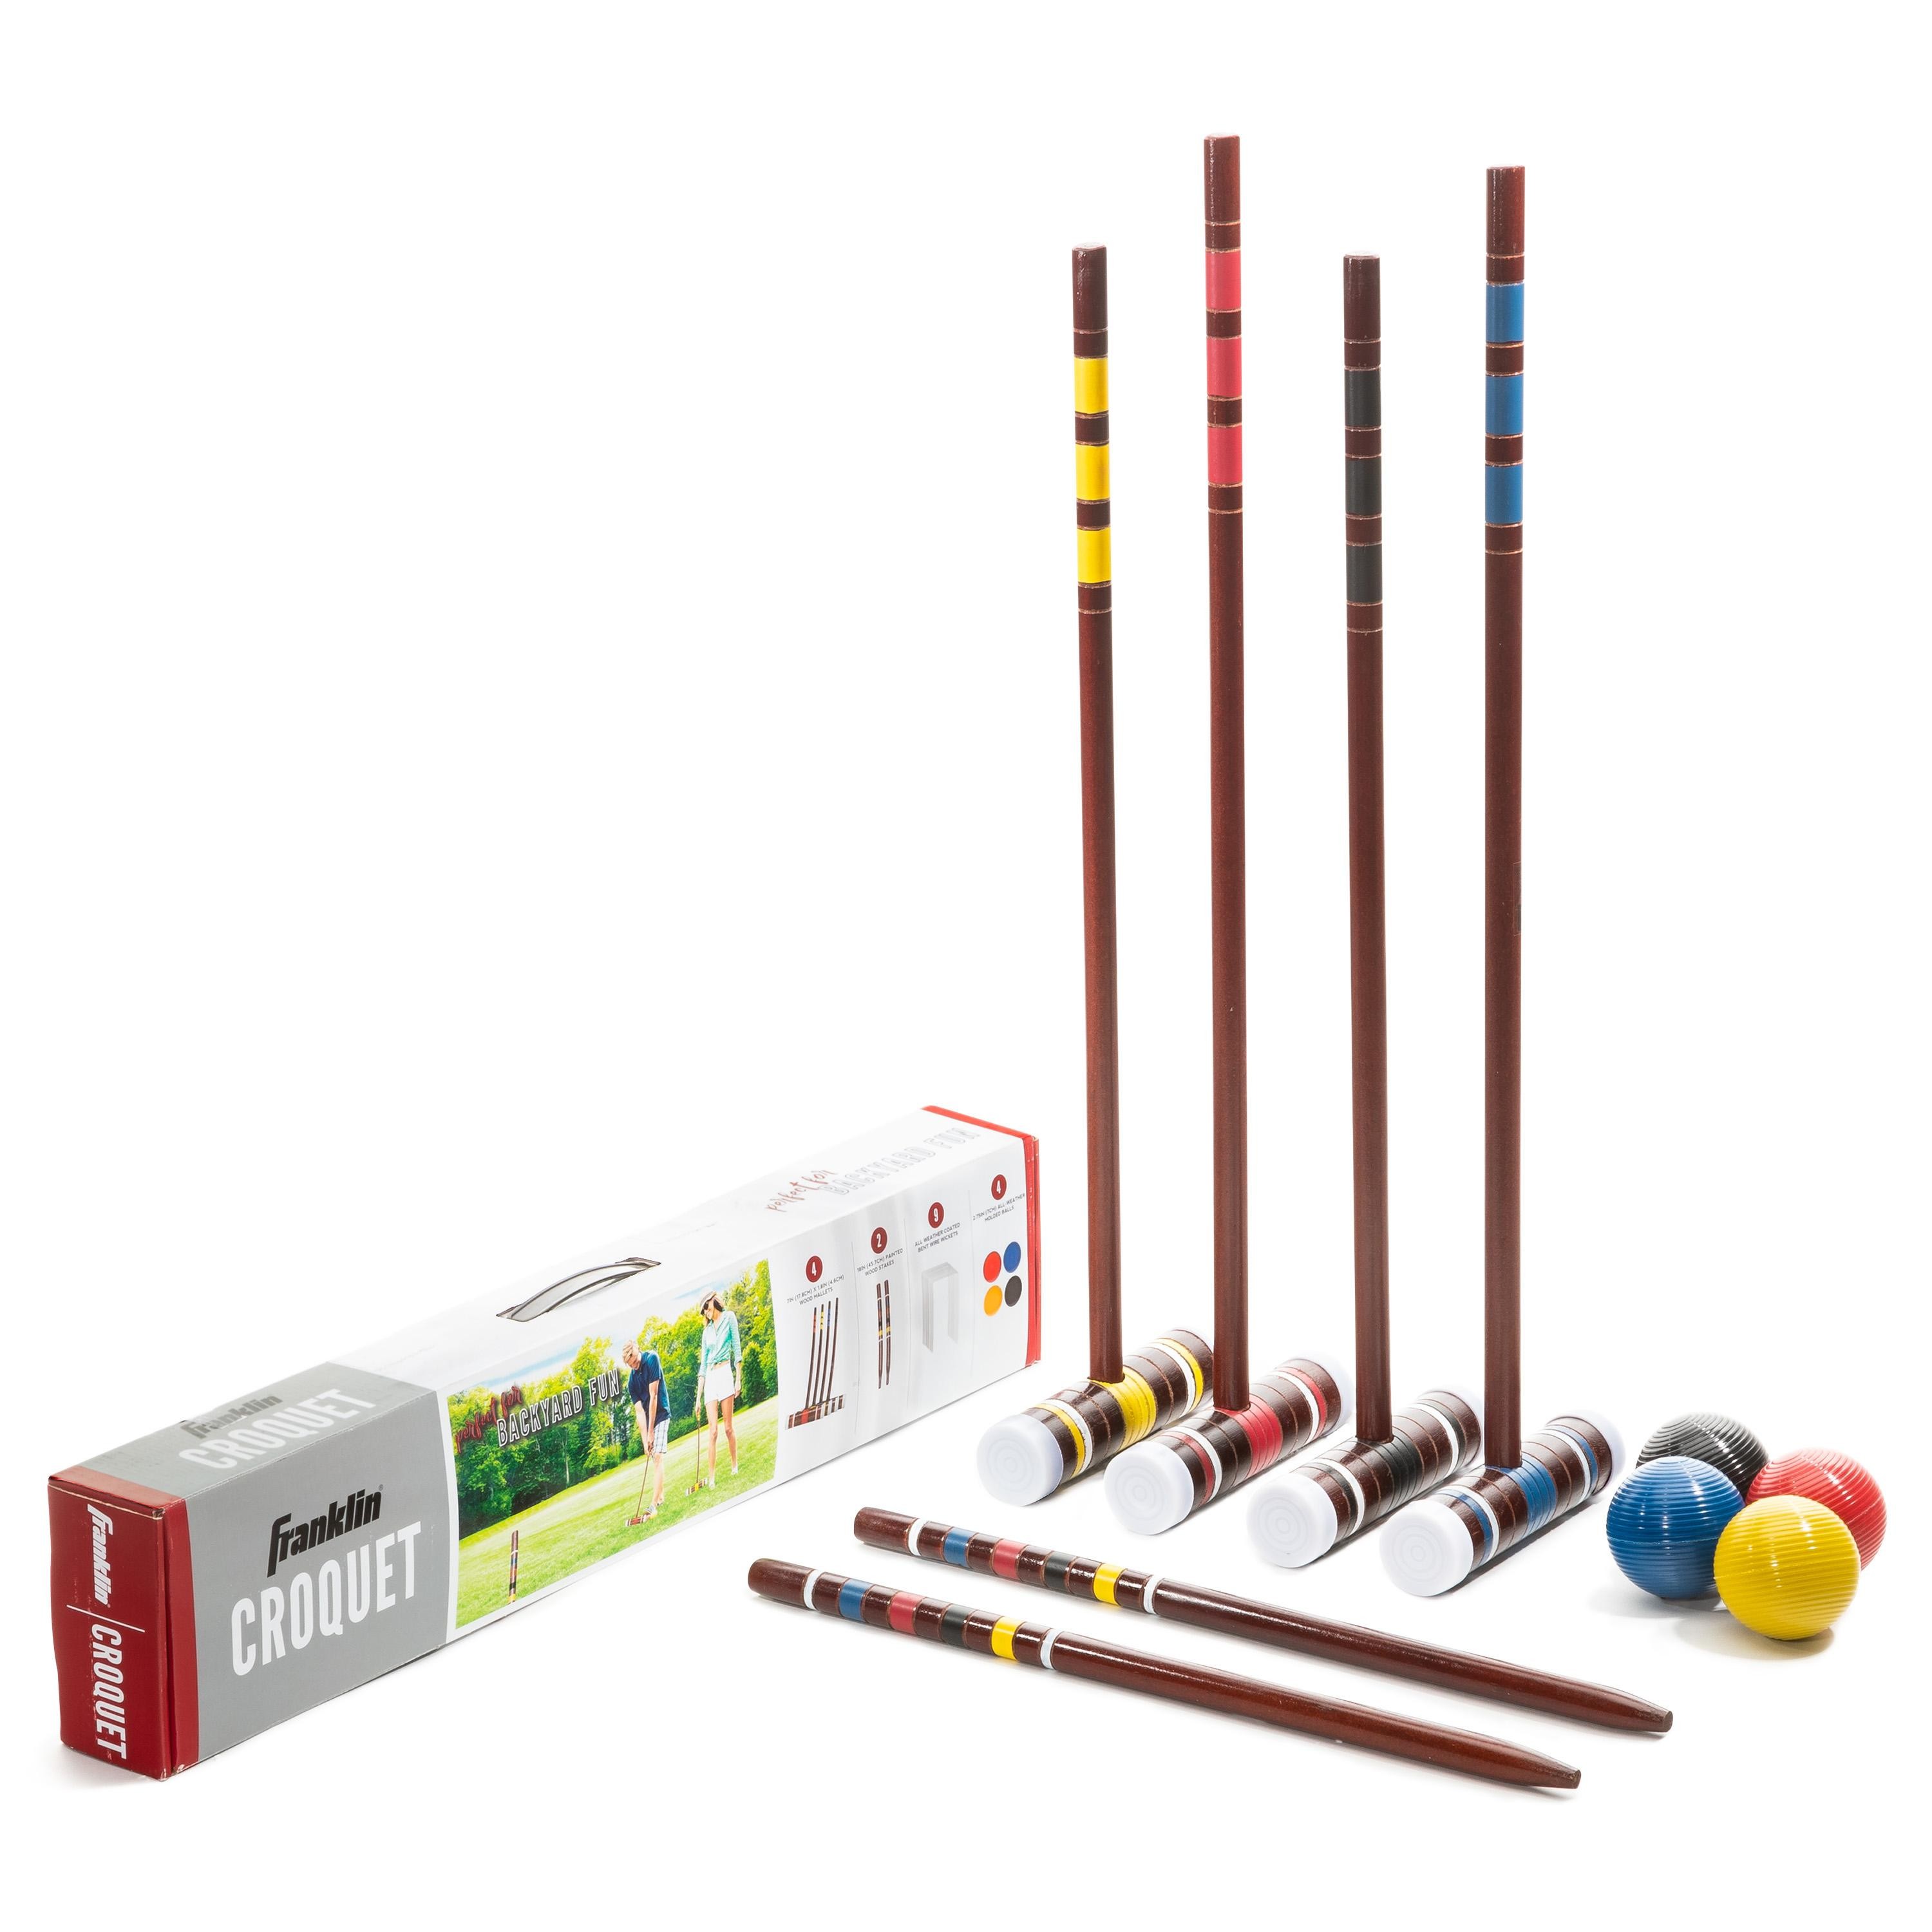 Franklin Sports Croquet Set - Includes 4 Croquet Wood Mallets  4 All Weather Balls  2 Wood Stakes and 9 Metal Wickets - Classic Family Outdoor Game -